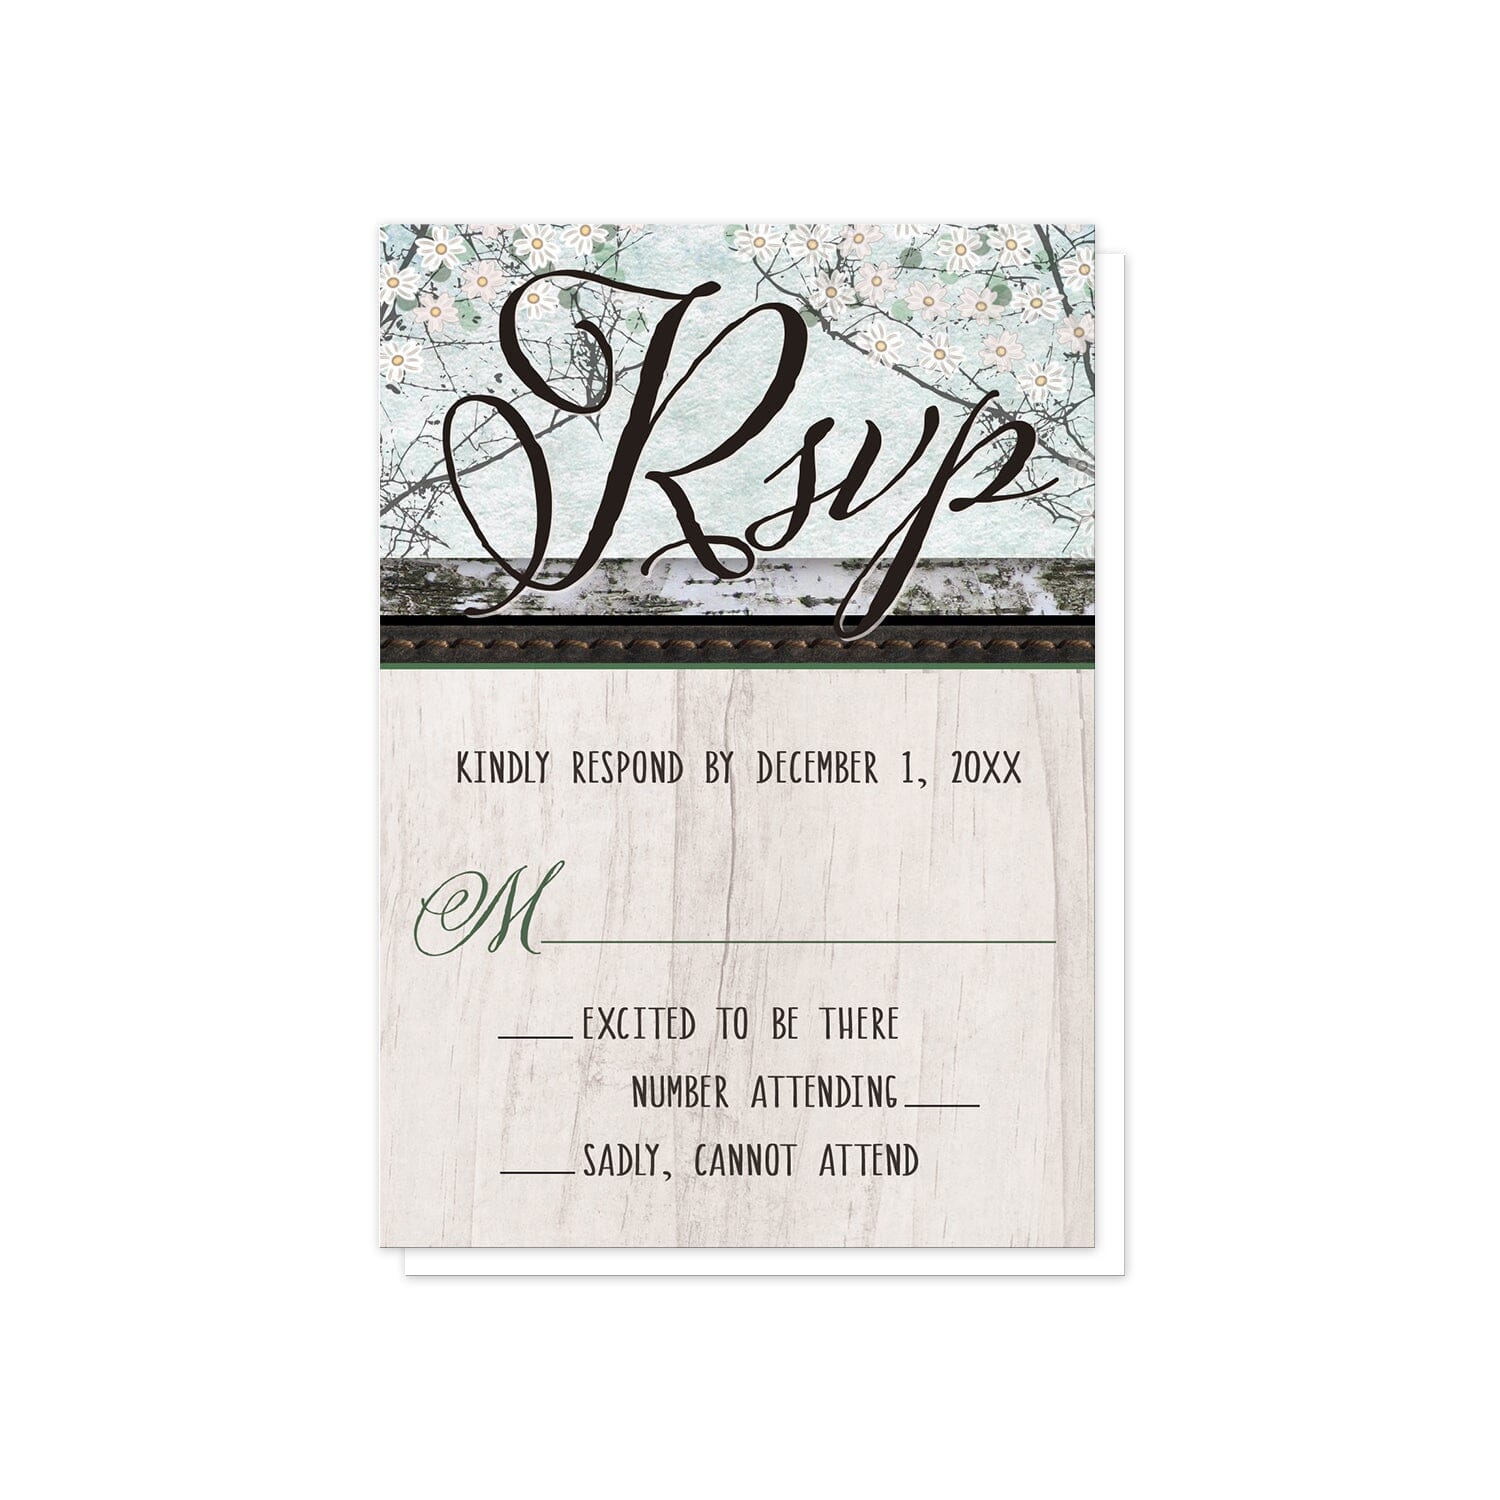 Rustic Bear Spring Floral RSVP Cards at Artistically Invited.